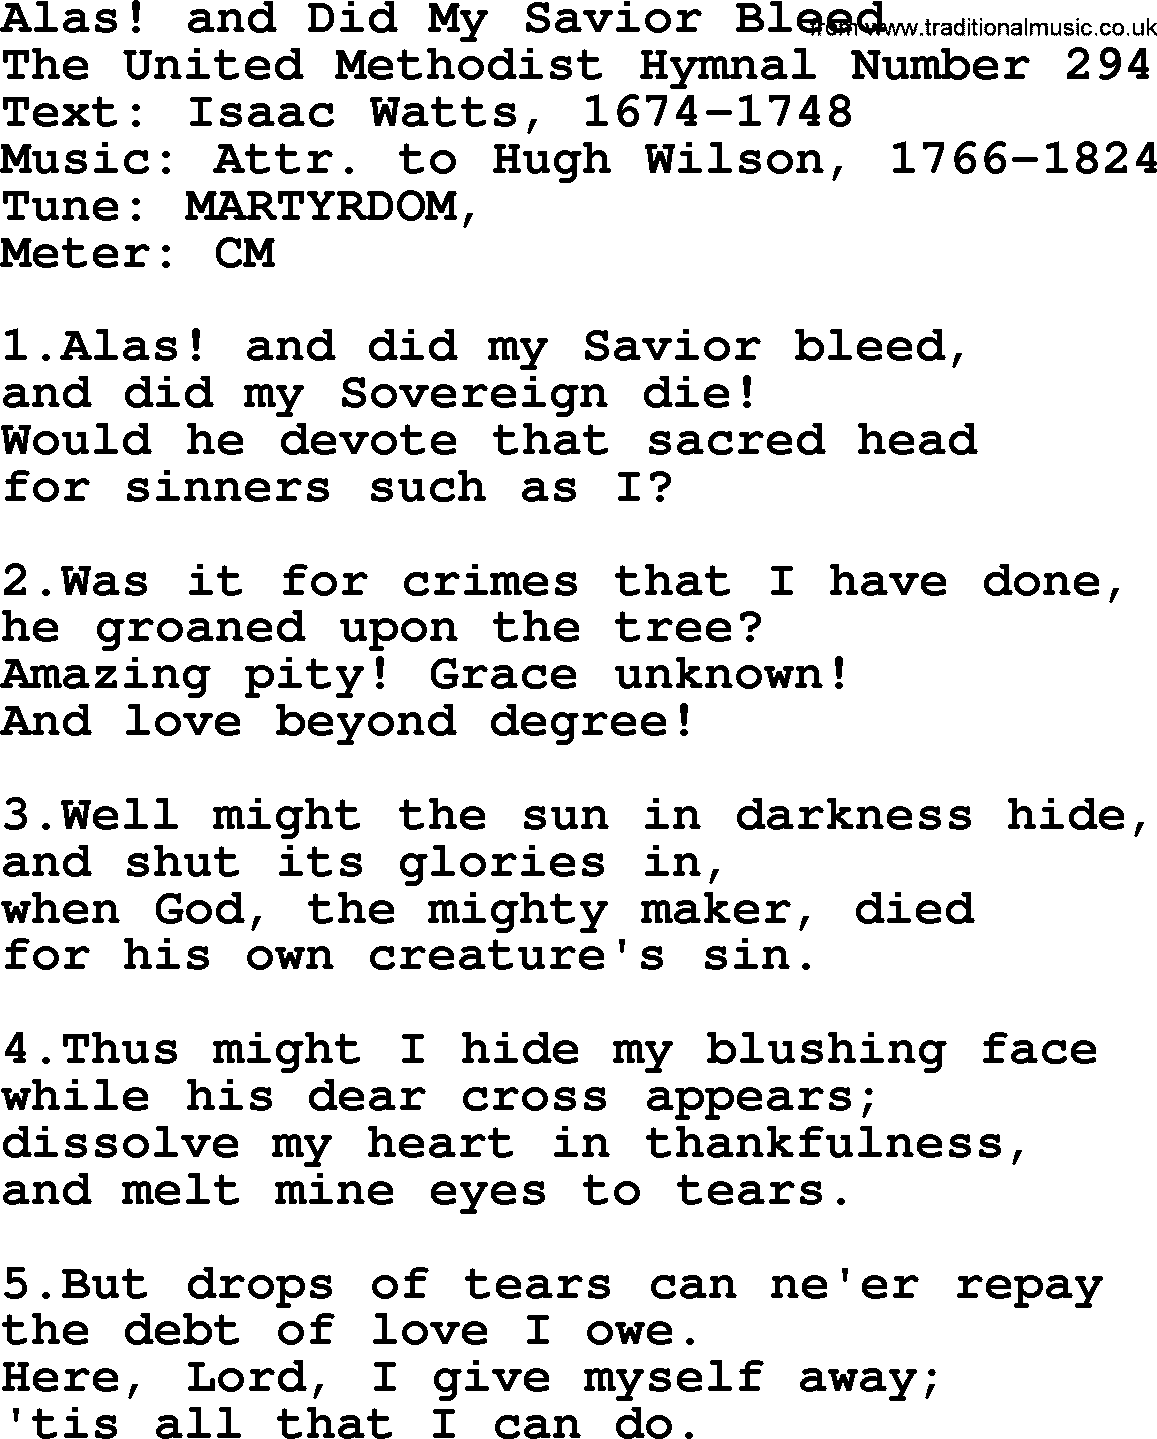 Ascensiontide Hynms collection, Hymn: Alas! And Did My Savior Bleed, lyrics and PDF